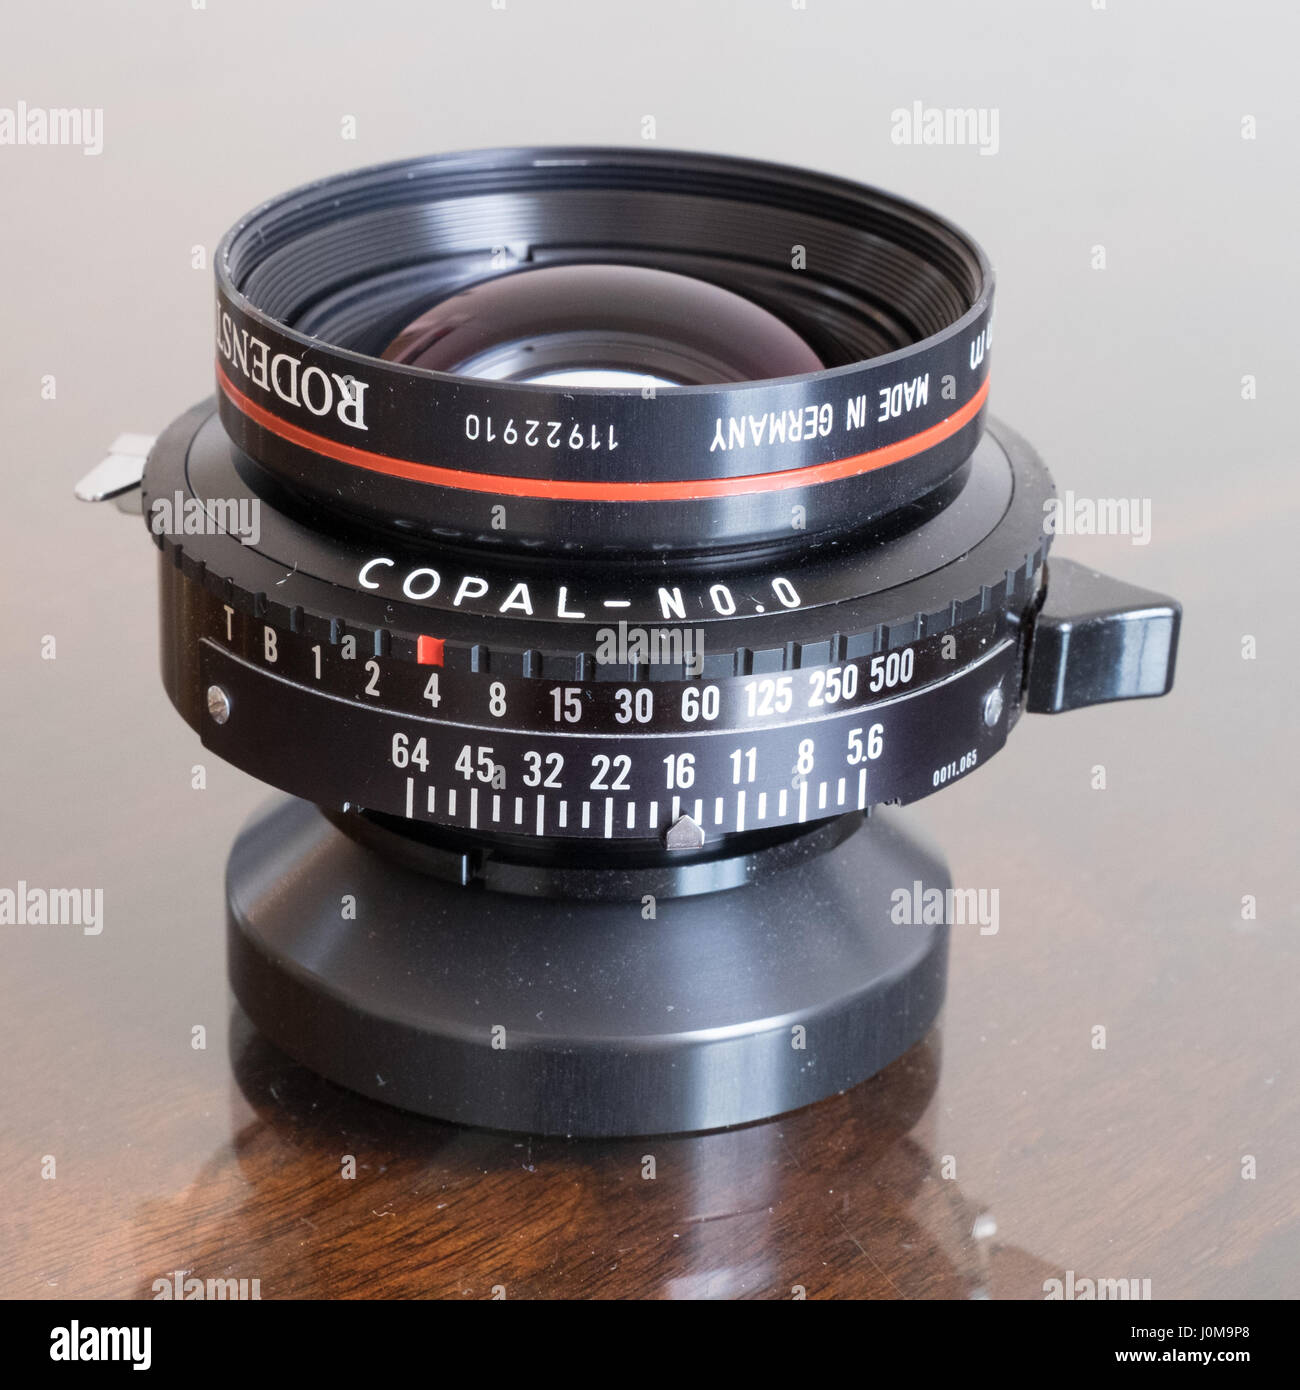 The Rodenstock 150mm f/5.6 Apo-Sironar-S Lens is a 4x5 format lens for universal use which has been modified to provide the highest image reproduction Stock Photo